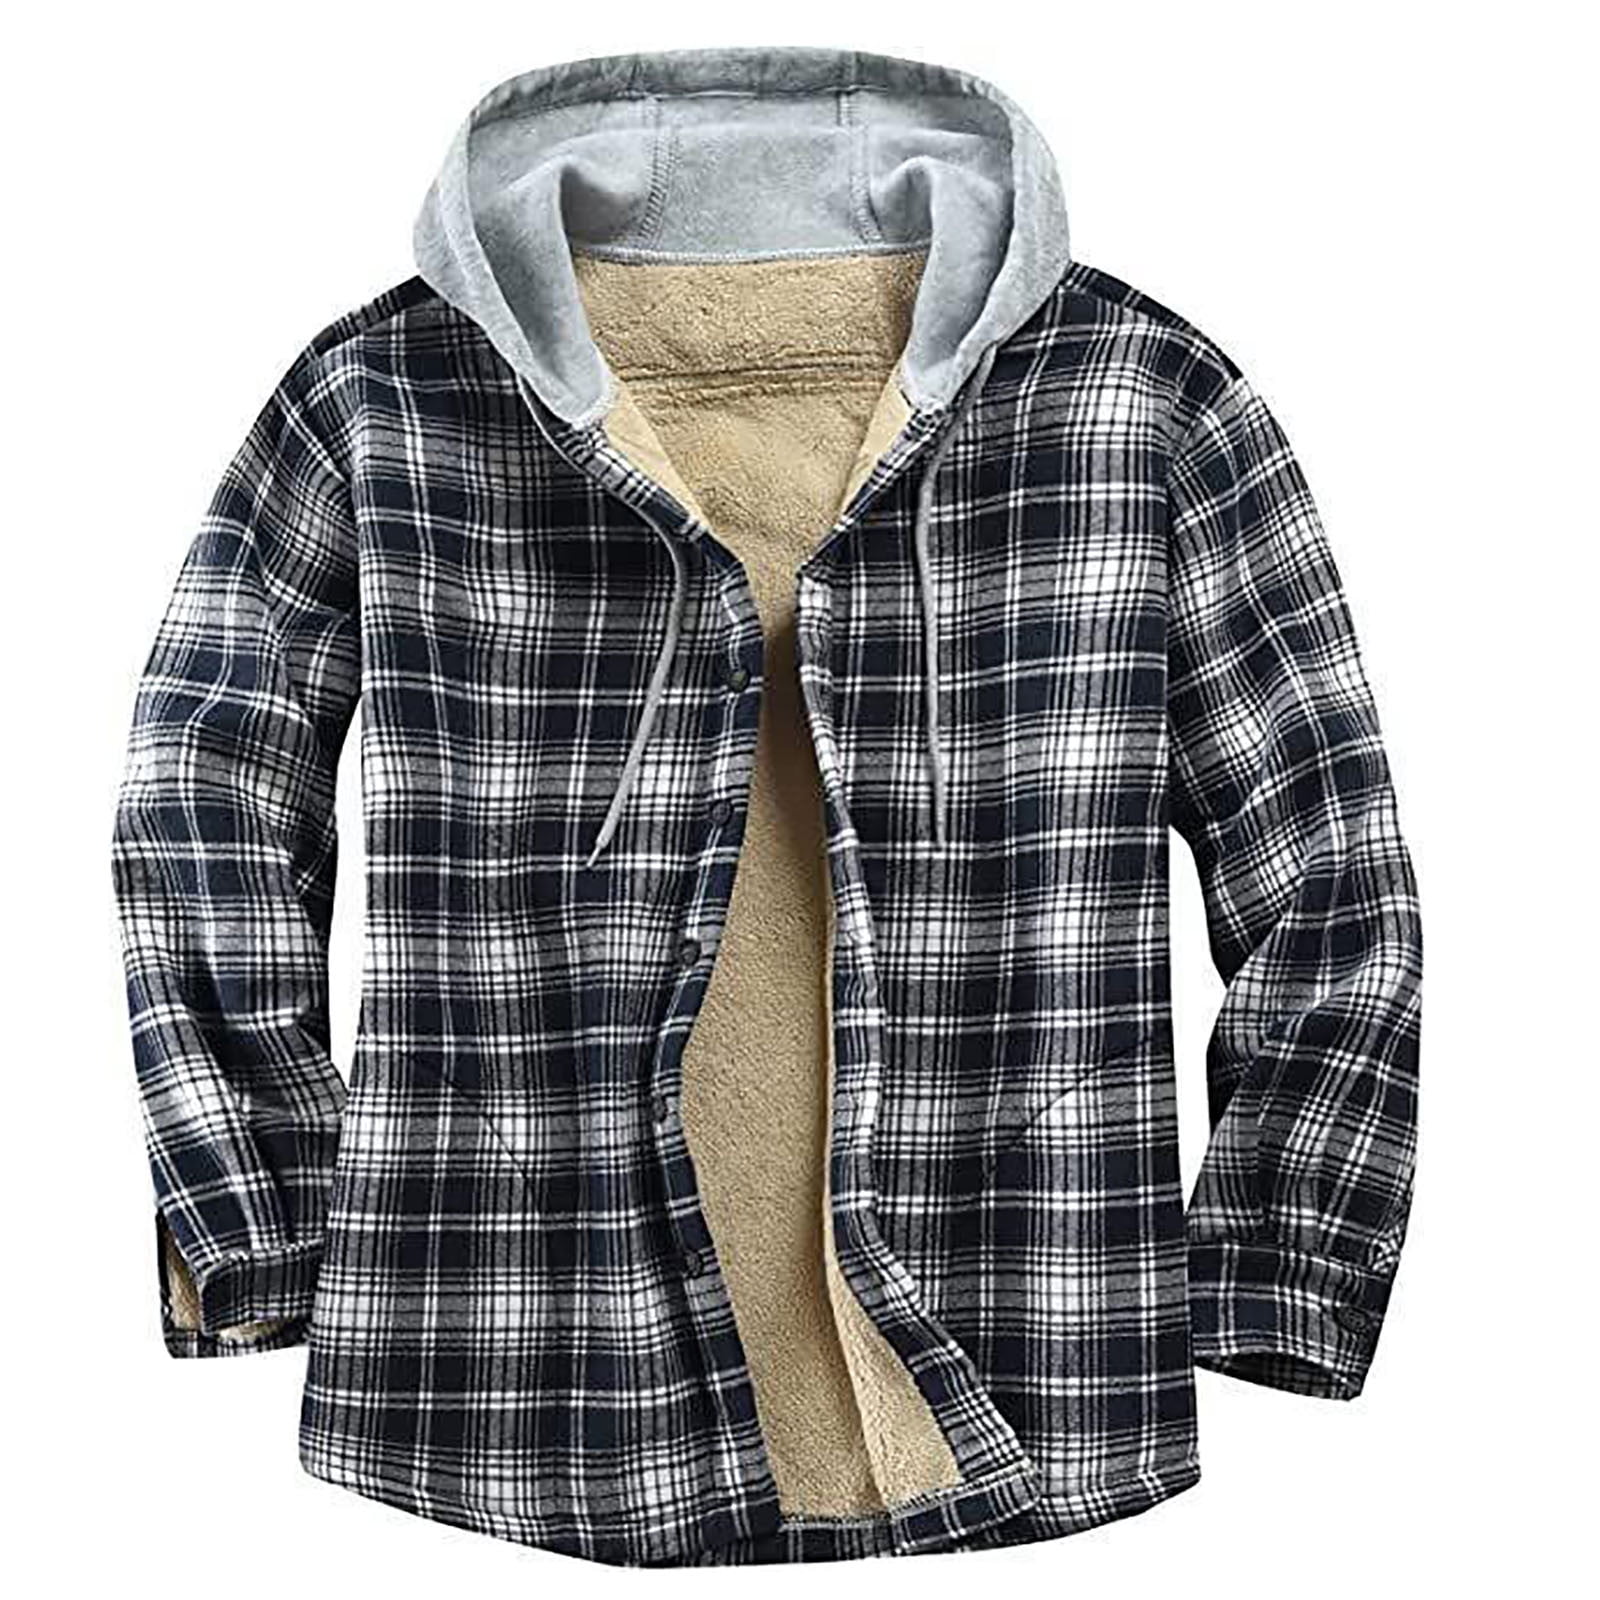 ZCFZJW Men's Quilted Lined Flannel Hooded Shirt Jacket, Soft Long ...